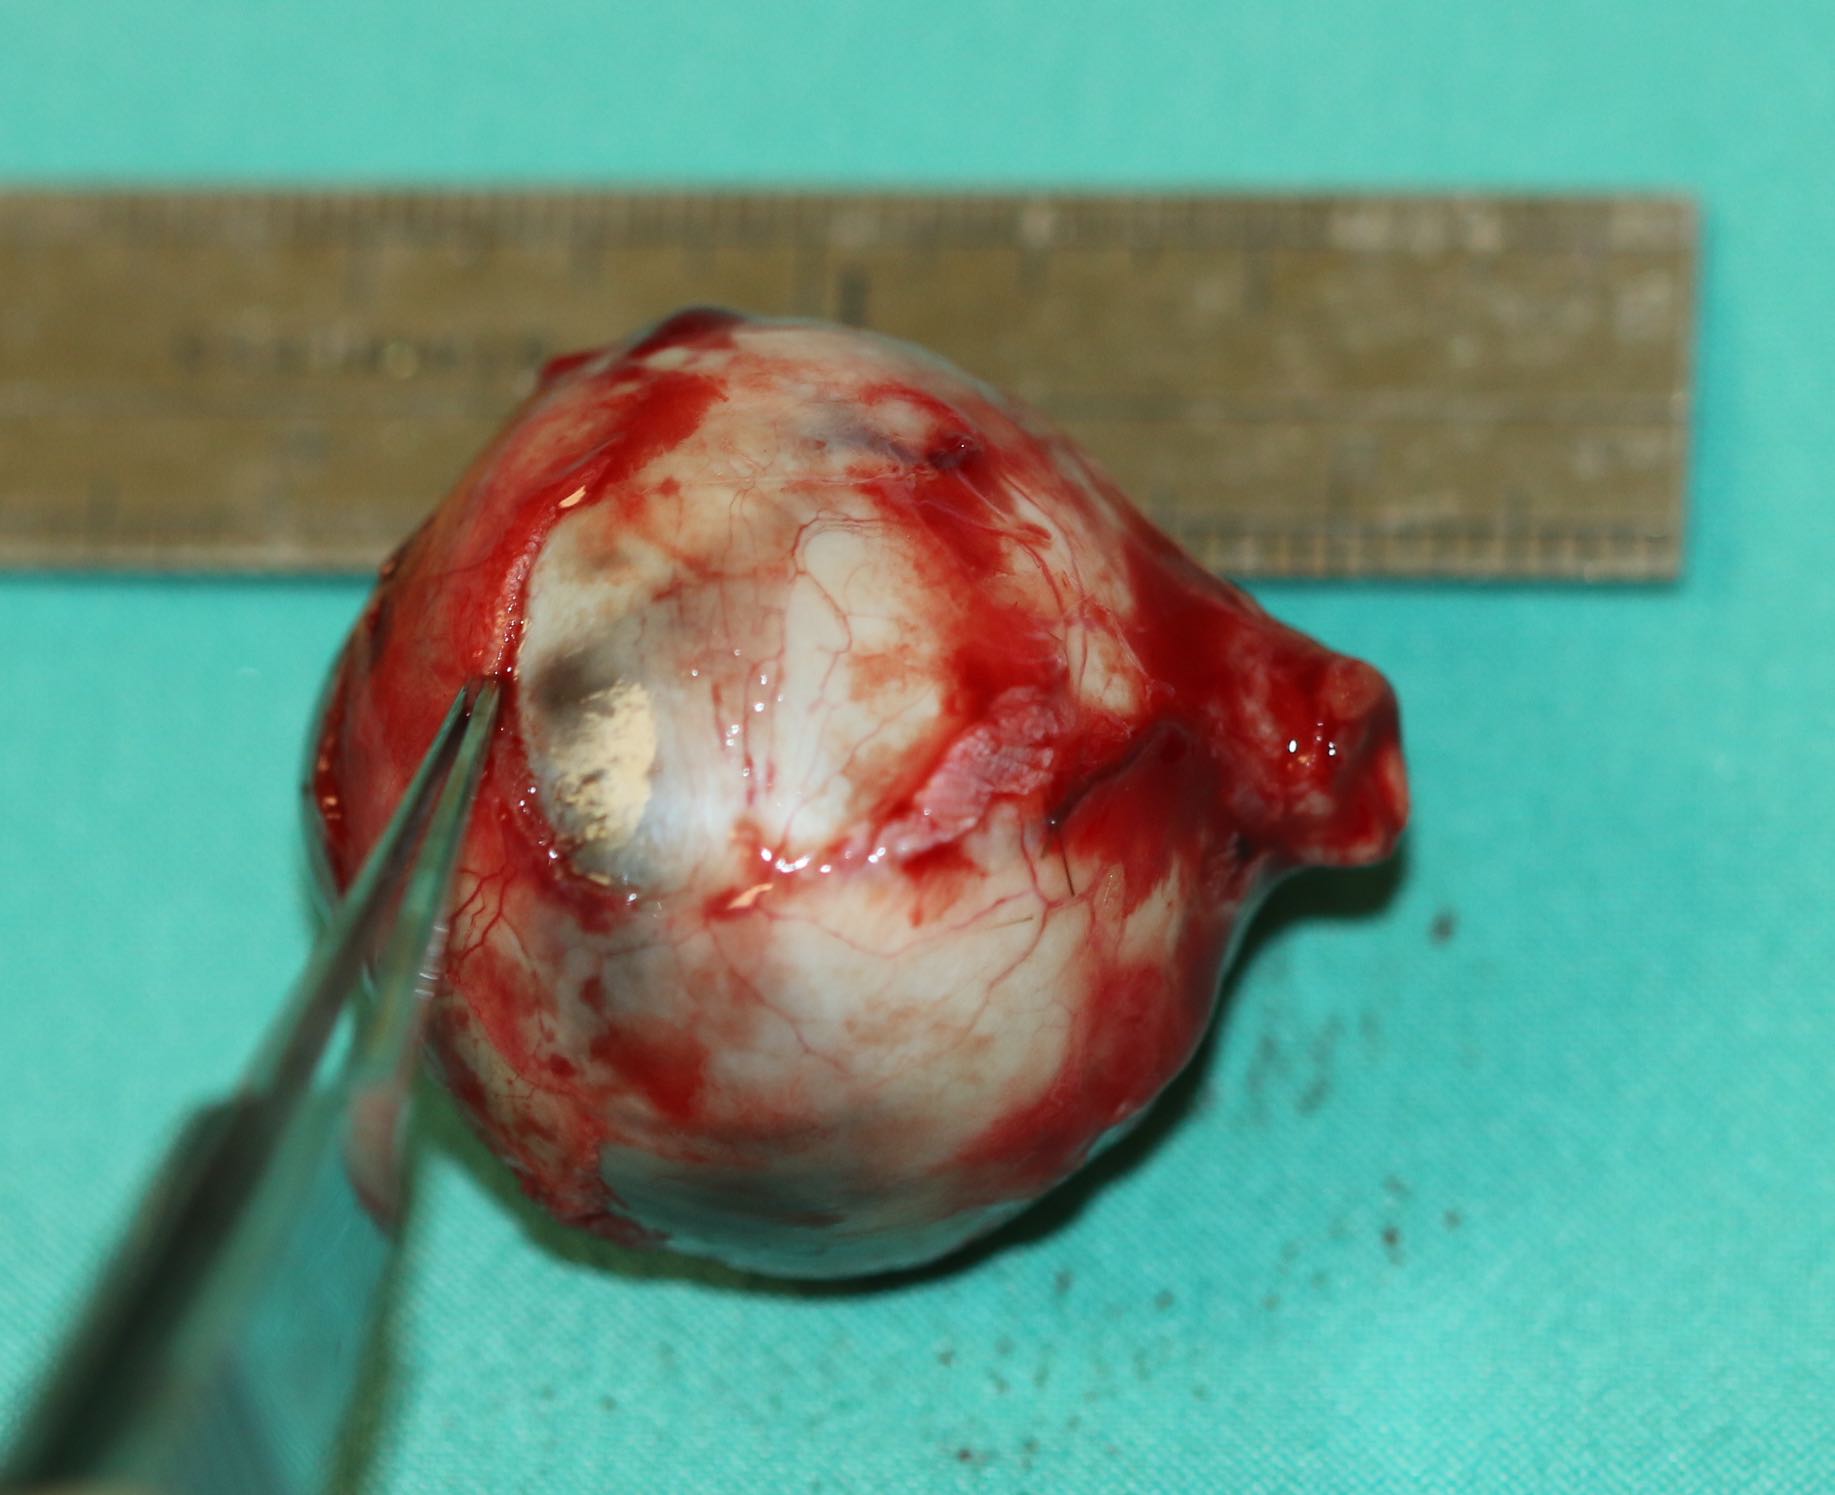 Enucleation